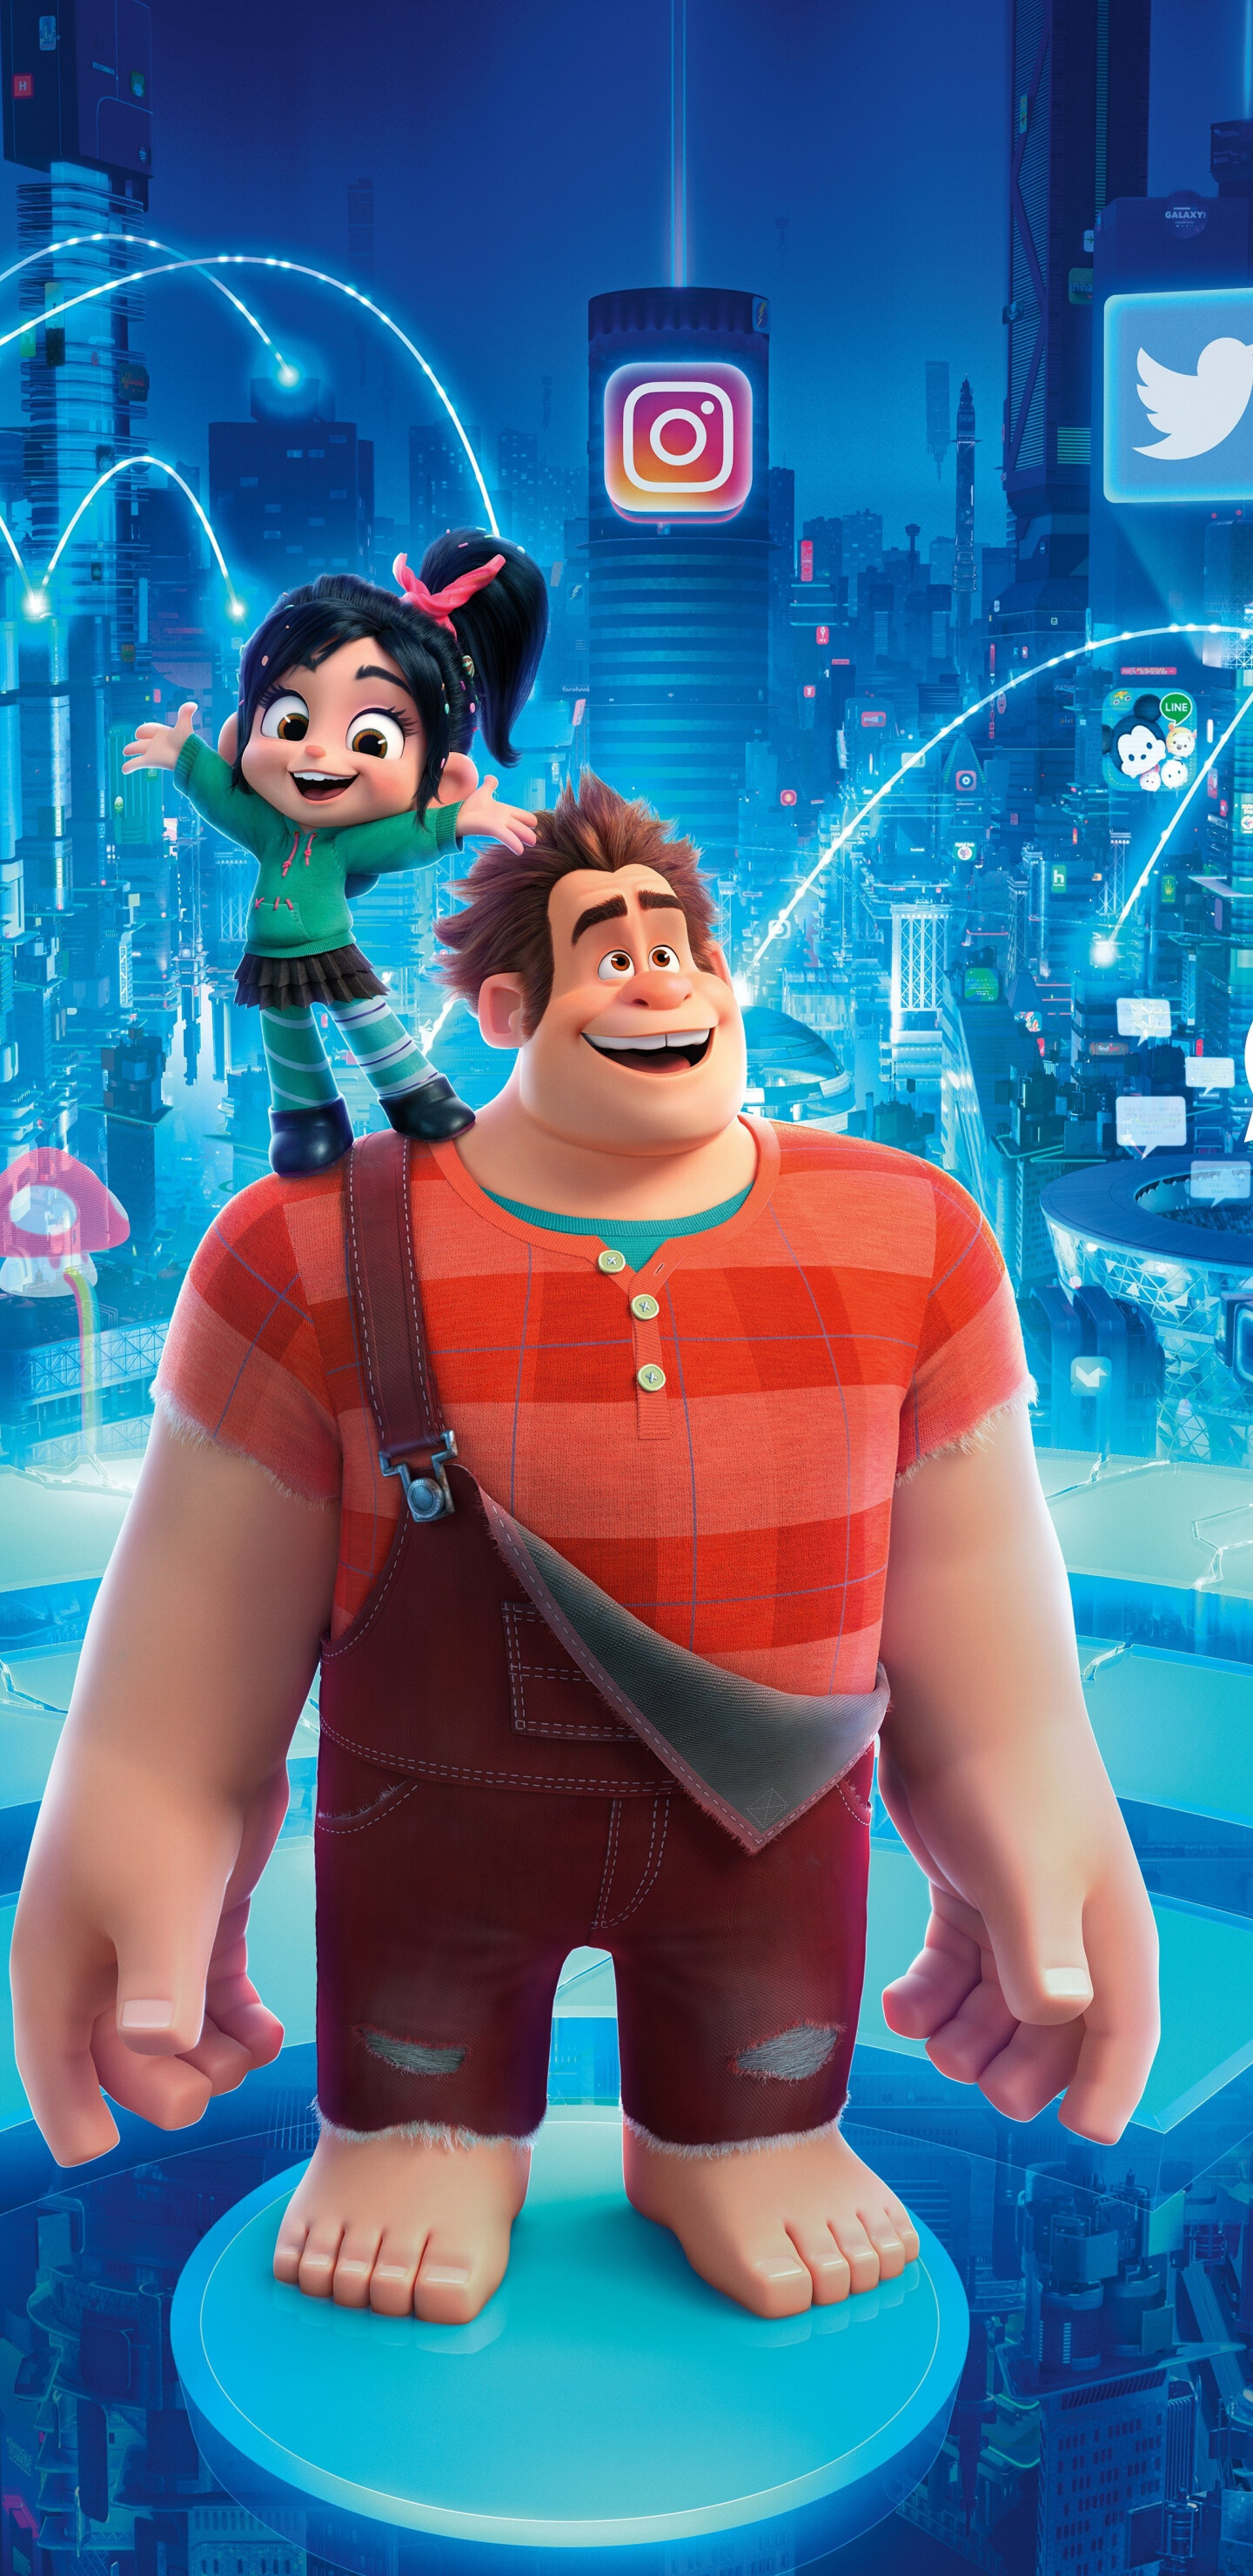 Wreck-It Ralph: The Annie Award for Best Animated Feature, Ralph Breaks The Internet, 2018. 1440x2960 HD Wallpaper.